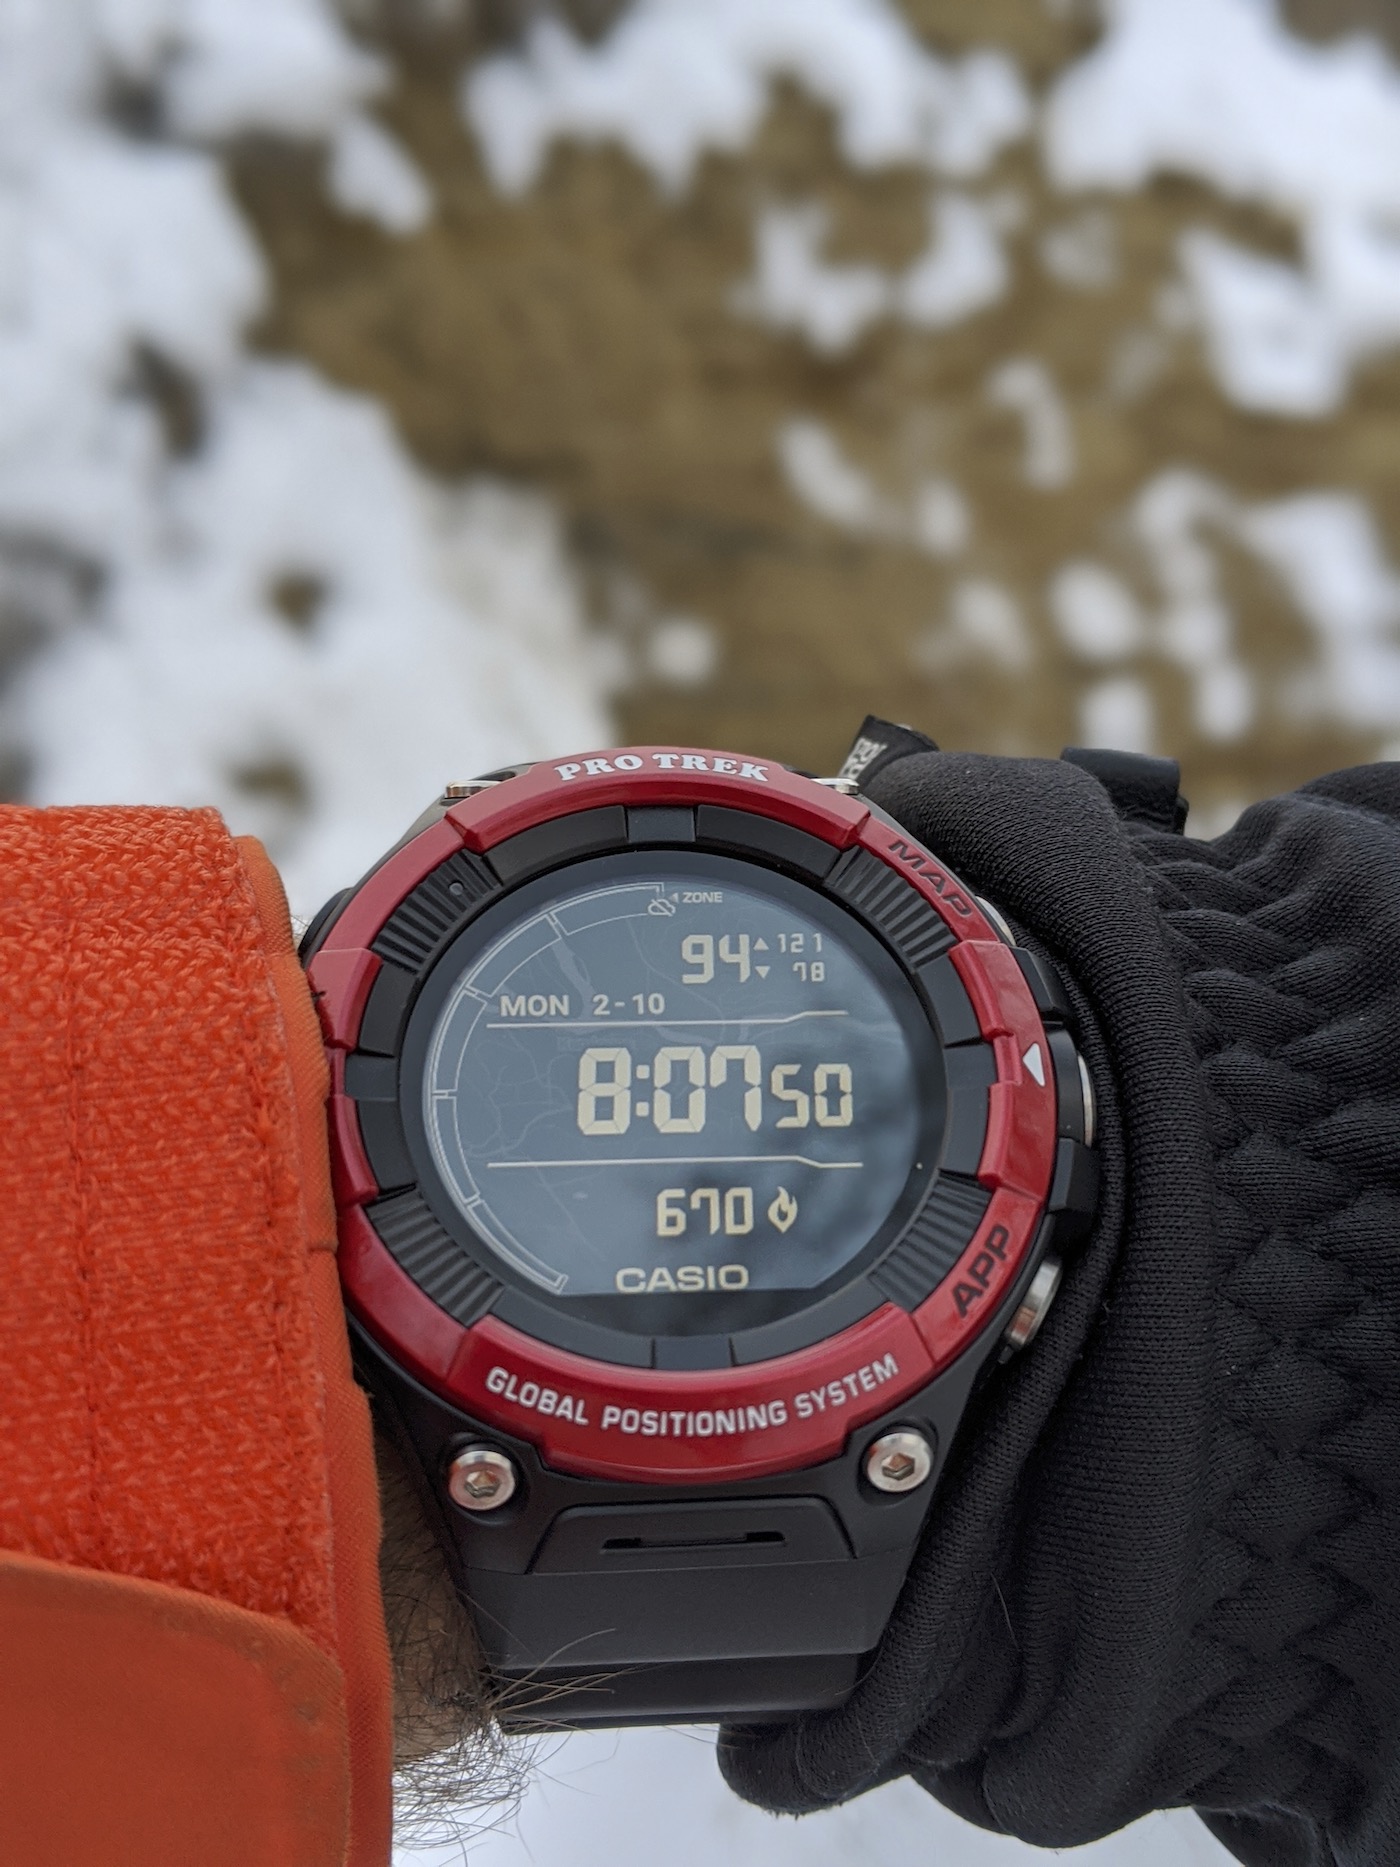 The Casio WSD-F21HR has a heart rate monitor, finally - Android Authority